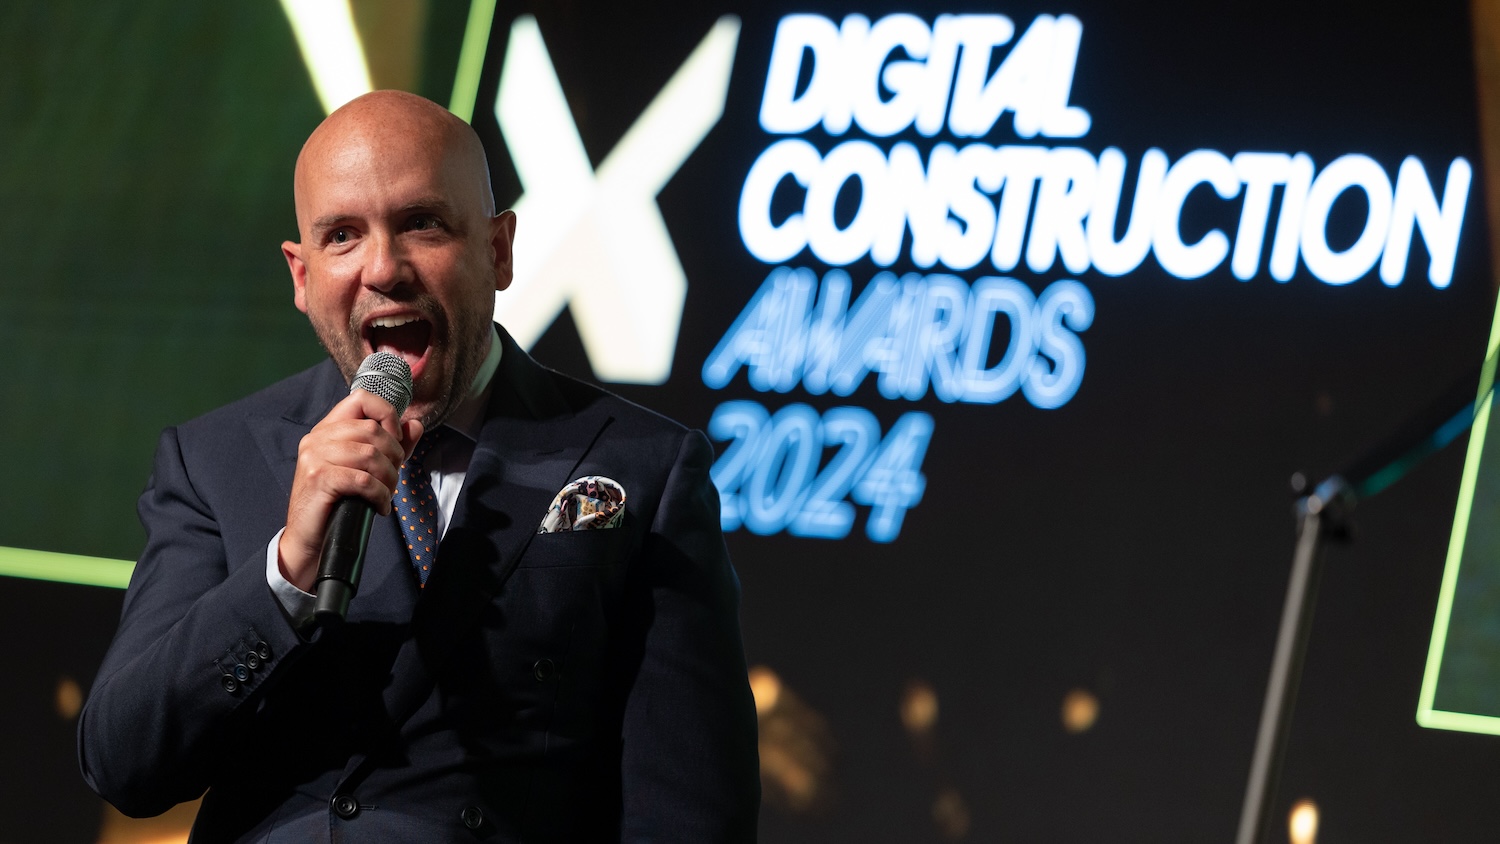 A photo of Tom Allen at the Digital Construction Awards 2024